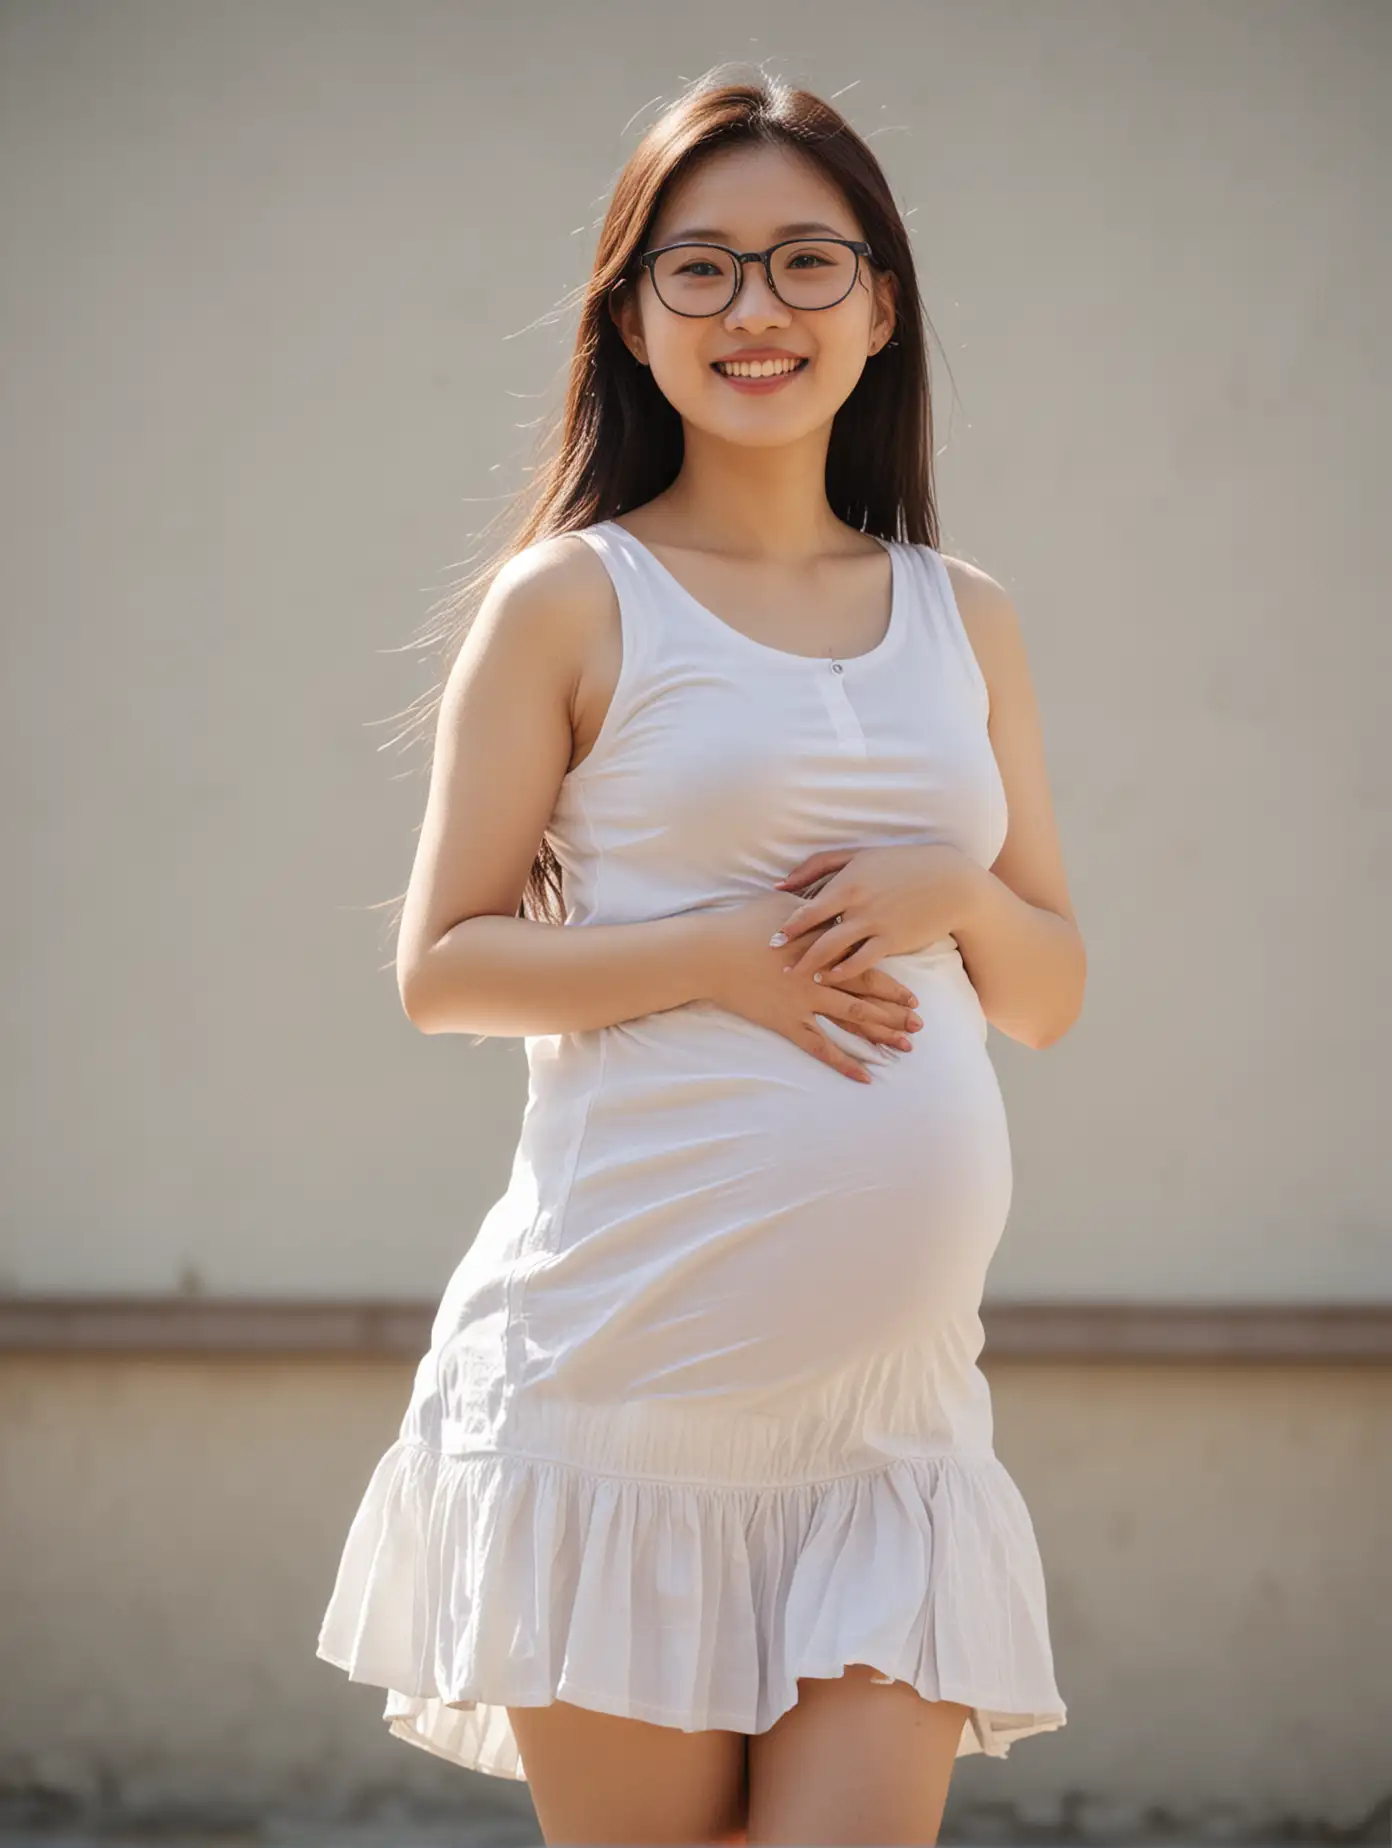 Smiling-Pregnant-Chinese-Woman-in-White-Skirt-and-Glasses